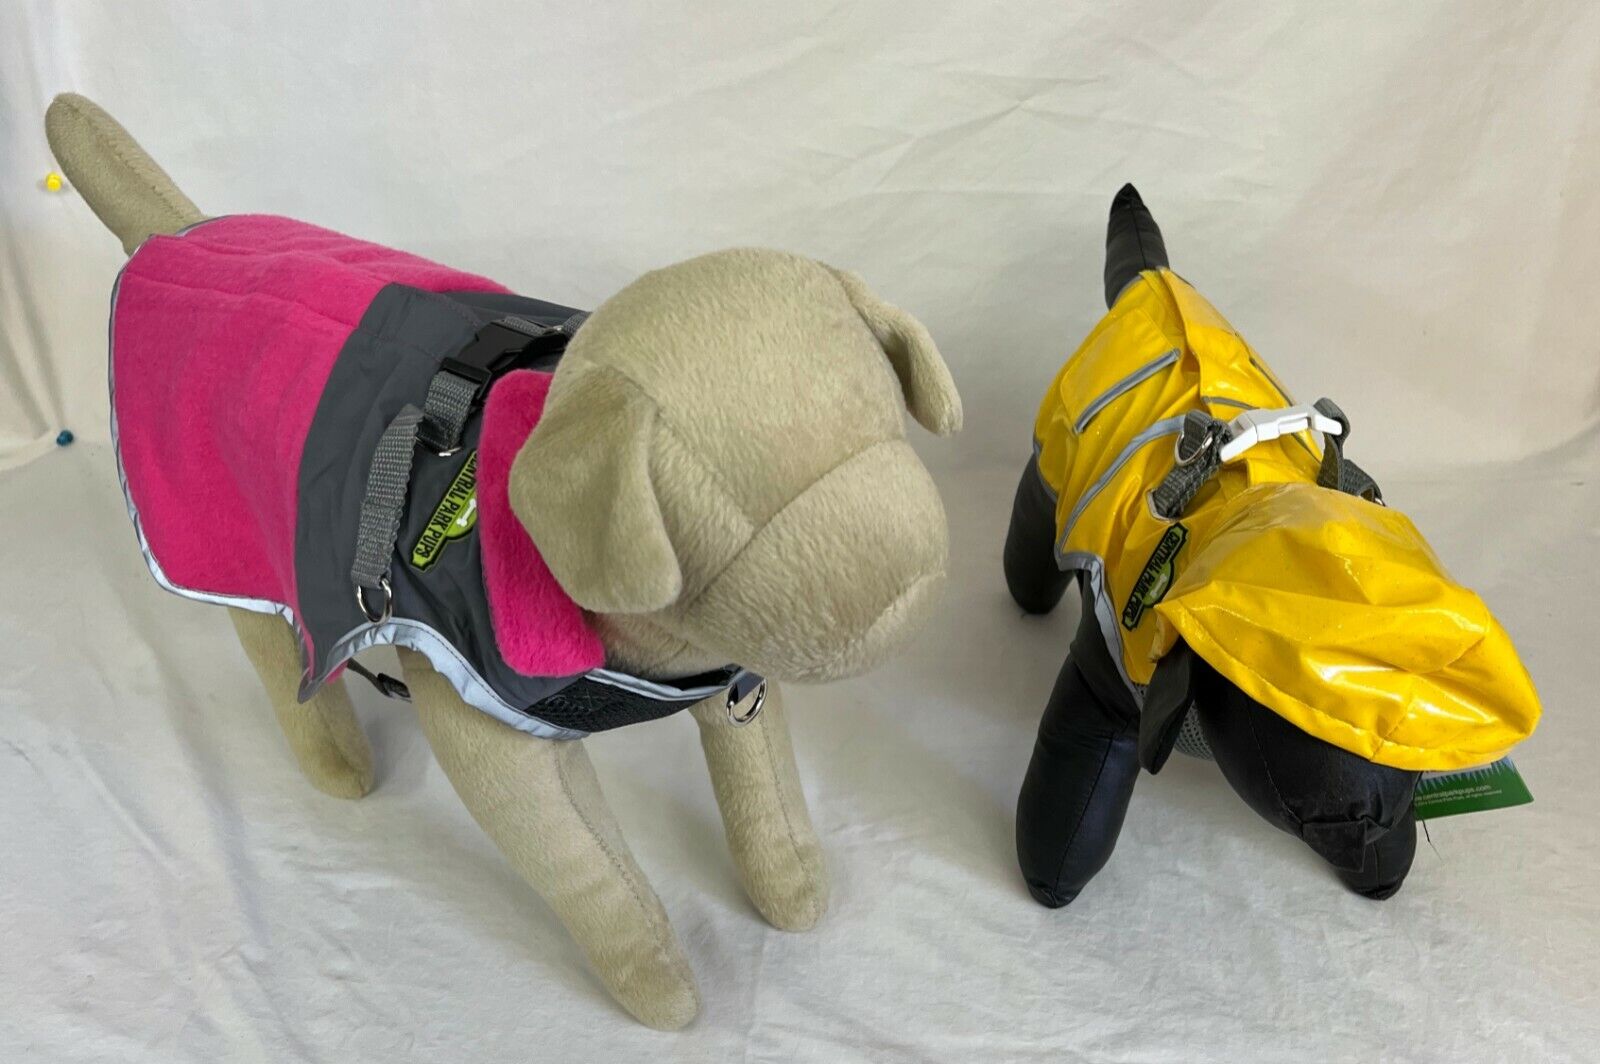 WHOLESALE DOG COATS/JACKETS & LEASHES - NEW INVENTORY FOR SALE BELOW COST CentralParkPups